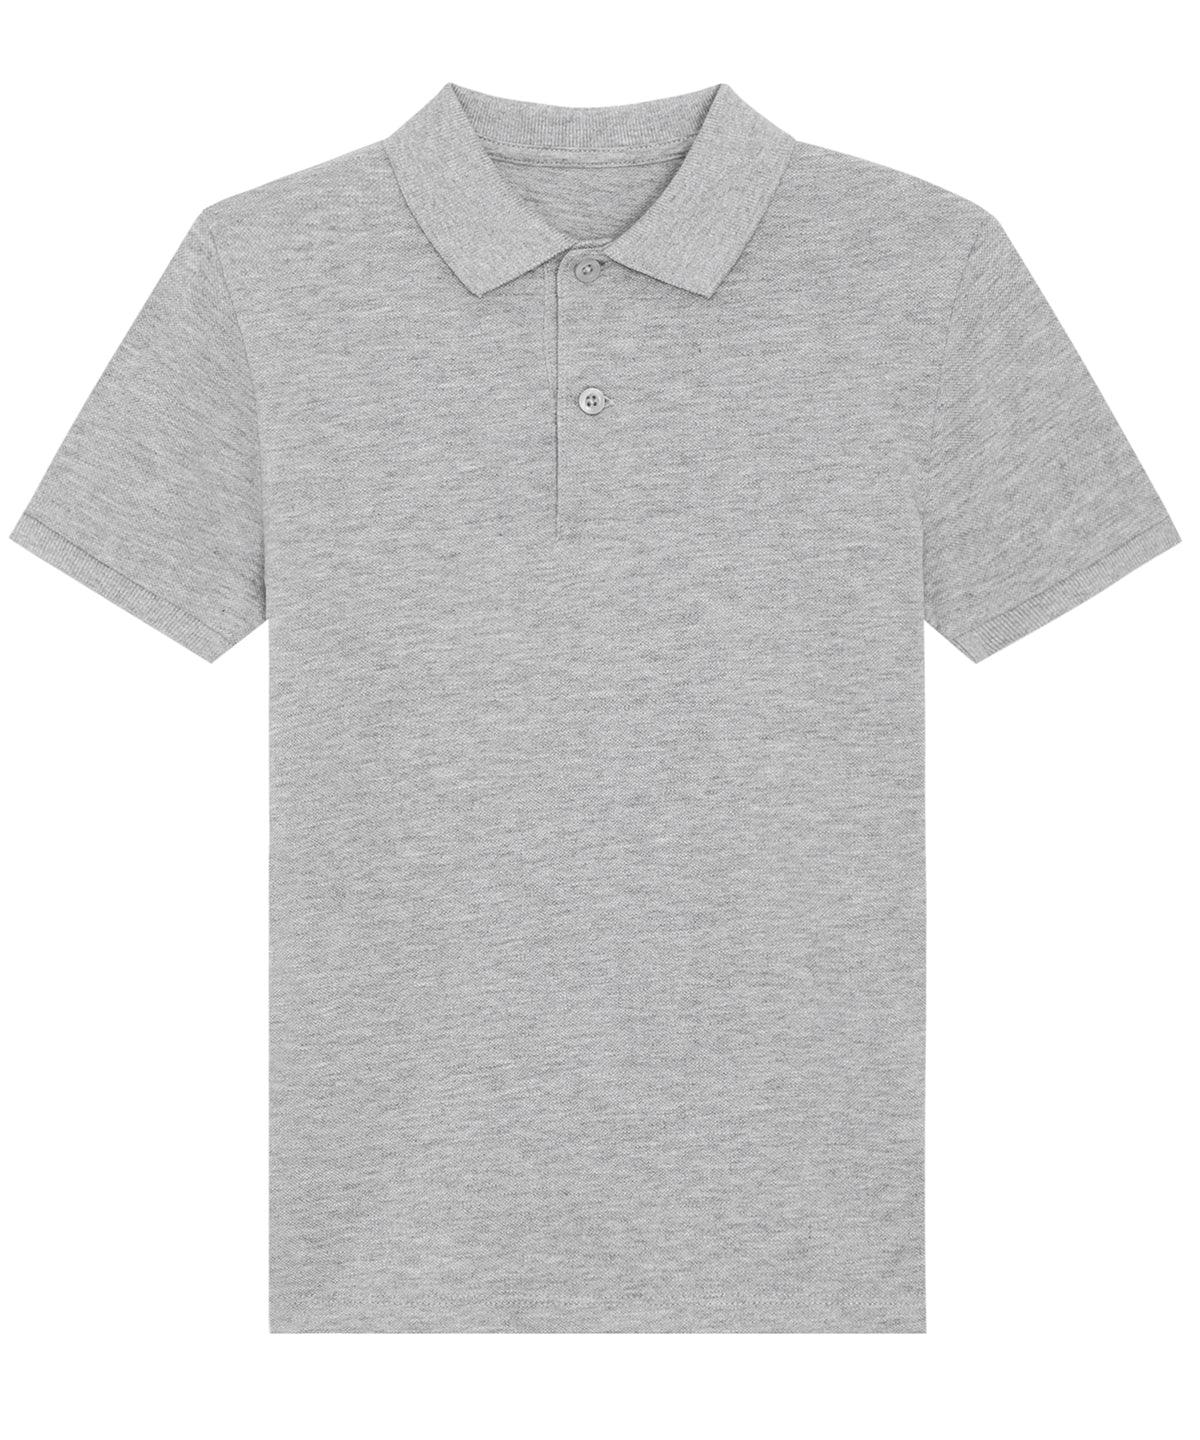 Heather Grey - Mini sprinter kids polo (STPK908) Polos Stanley/Stella Exclusives, Junior, New For 2021, New Styles, Polos & Casual, Raladeal - Stanley Stella Schoolwear Centres